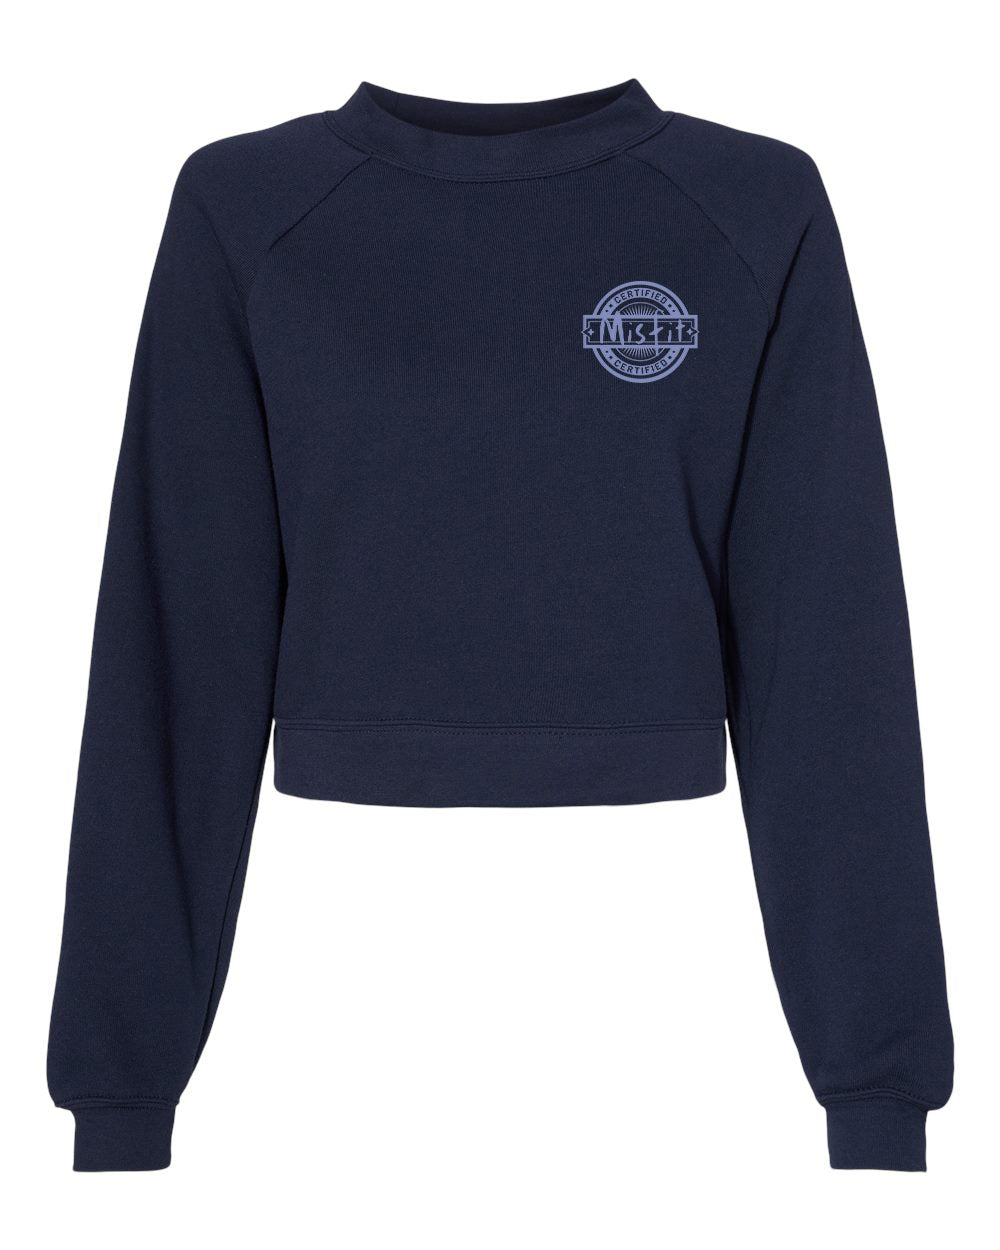 Certified Misfit Cropped Crewneck for Women by Seen Not Seen